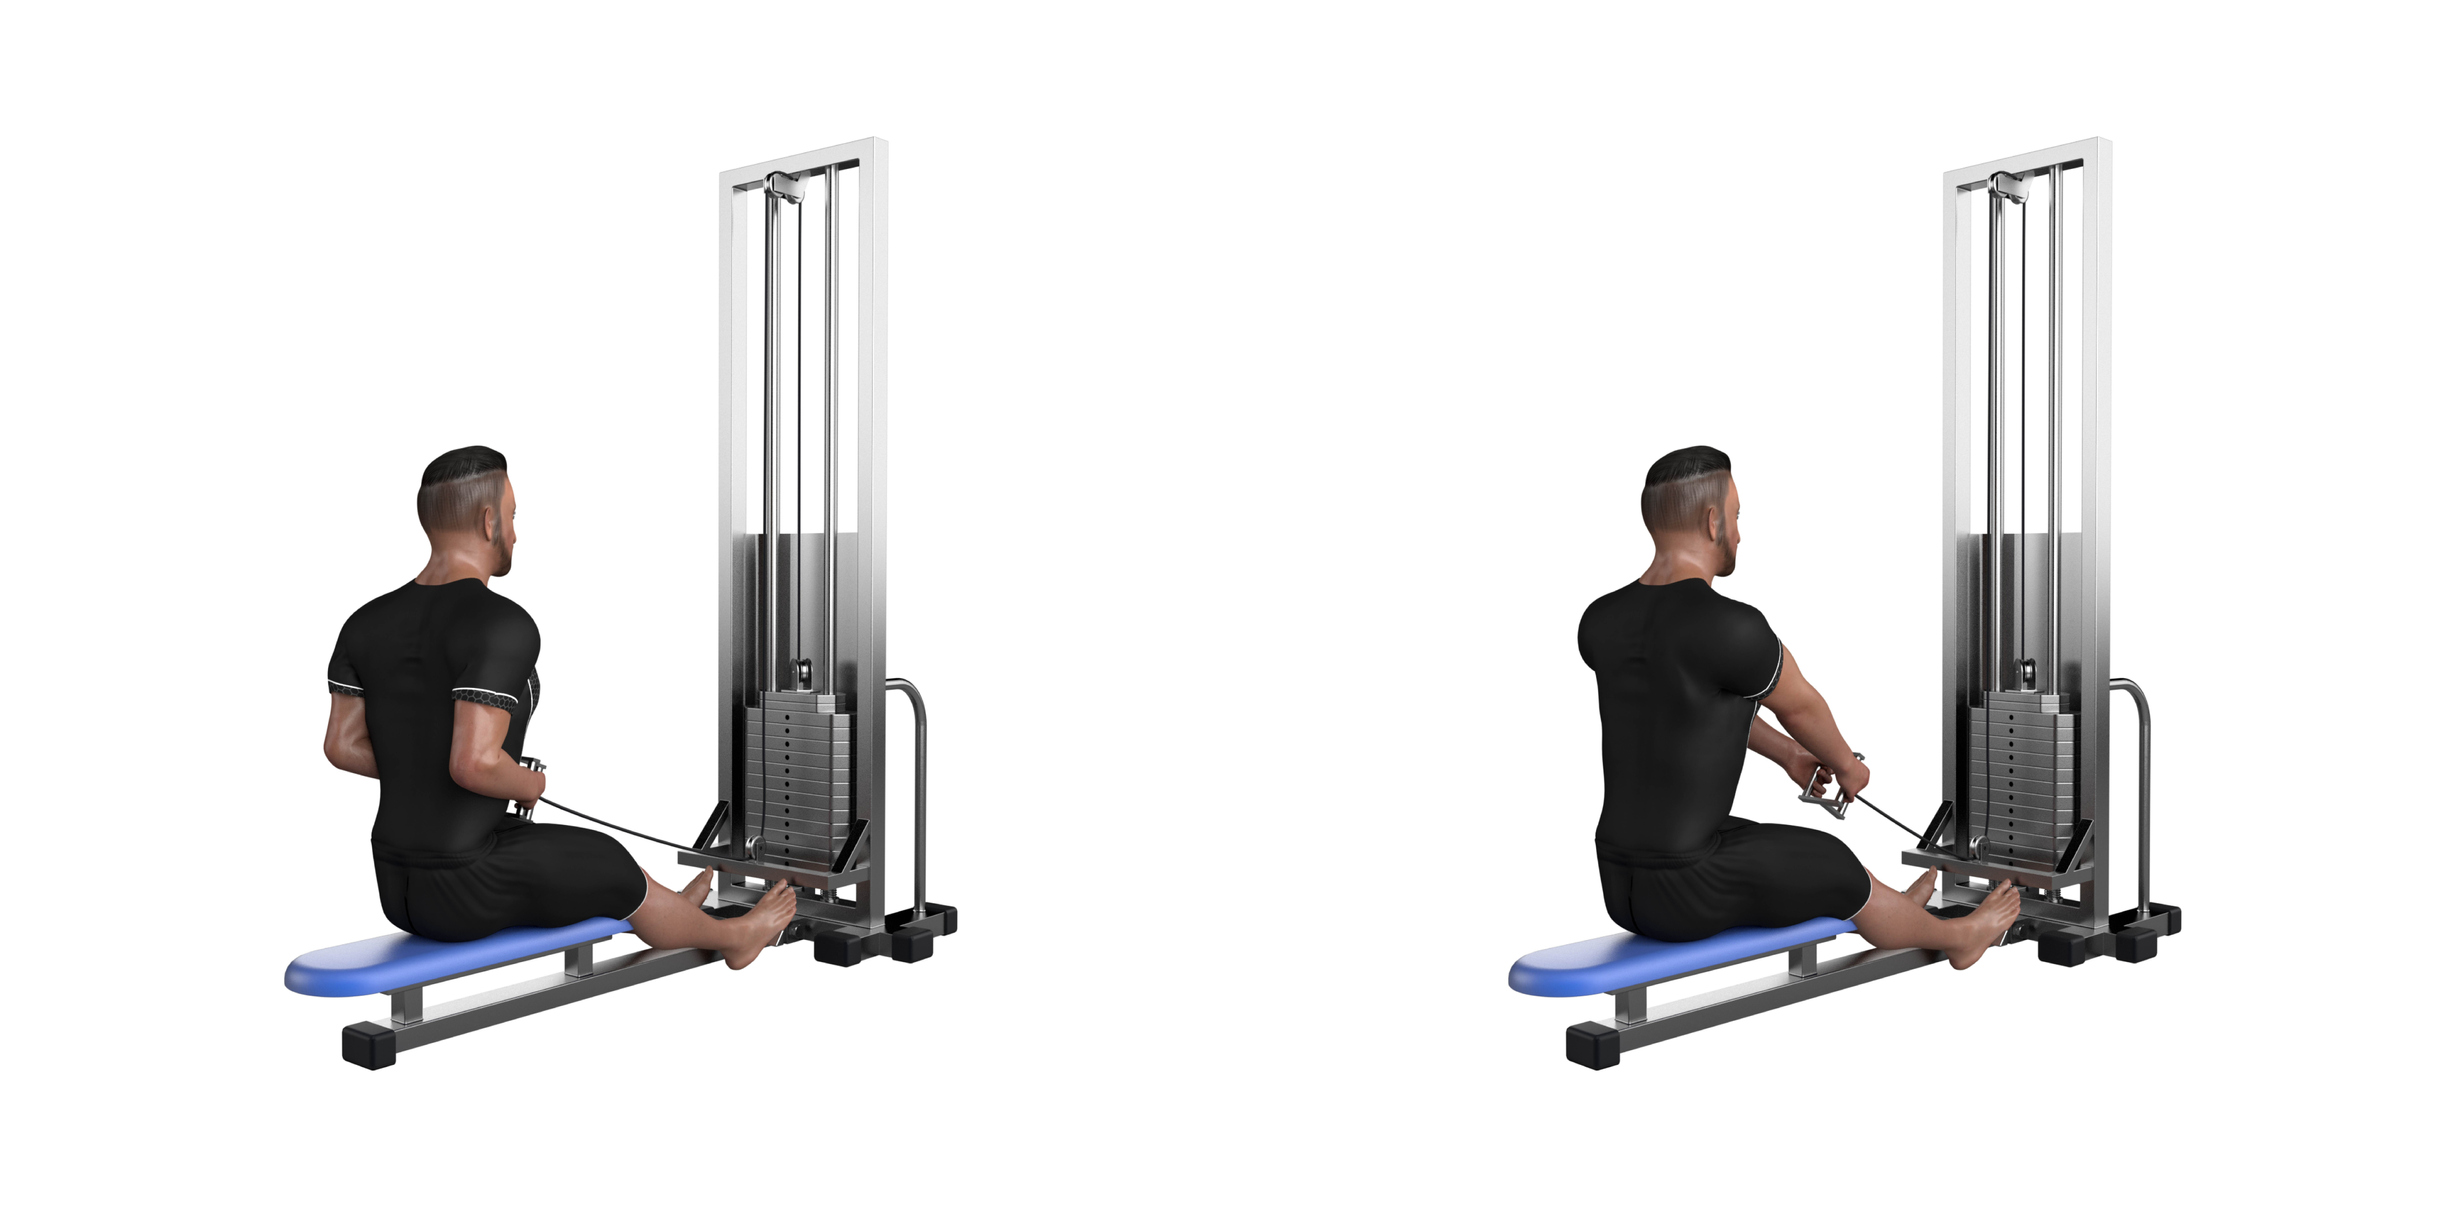 This exercise will give us strength for rowing or paddling. 